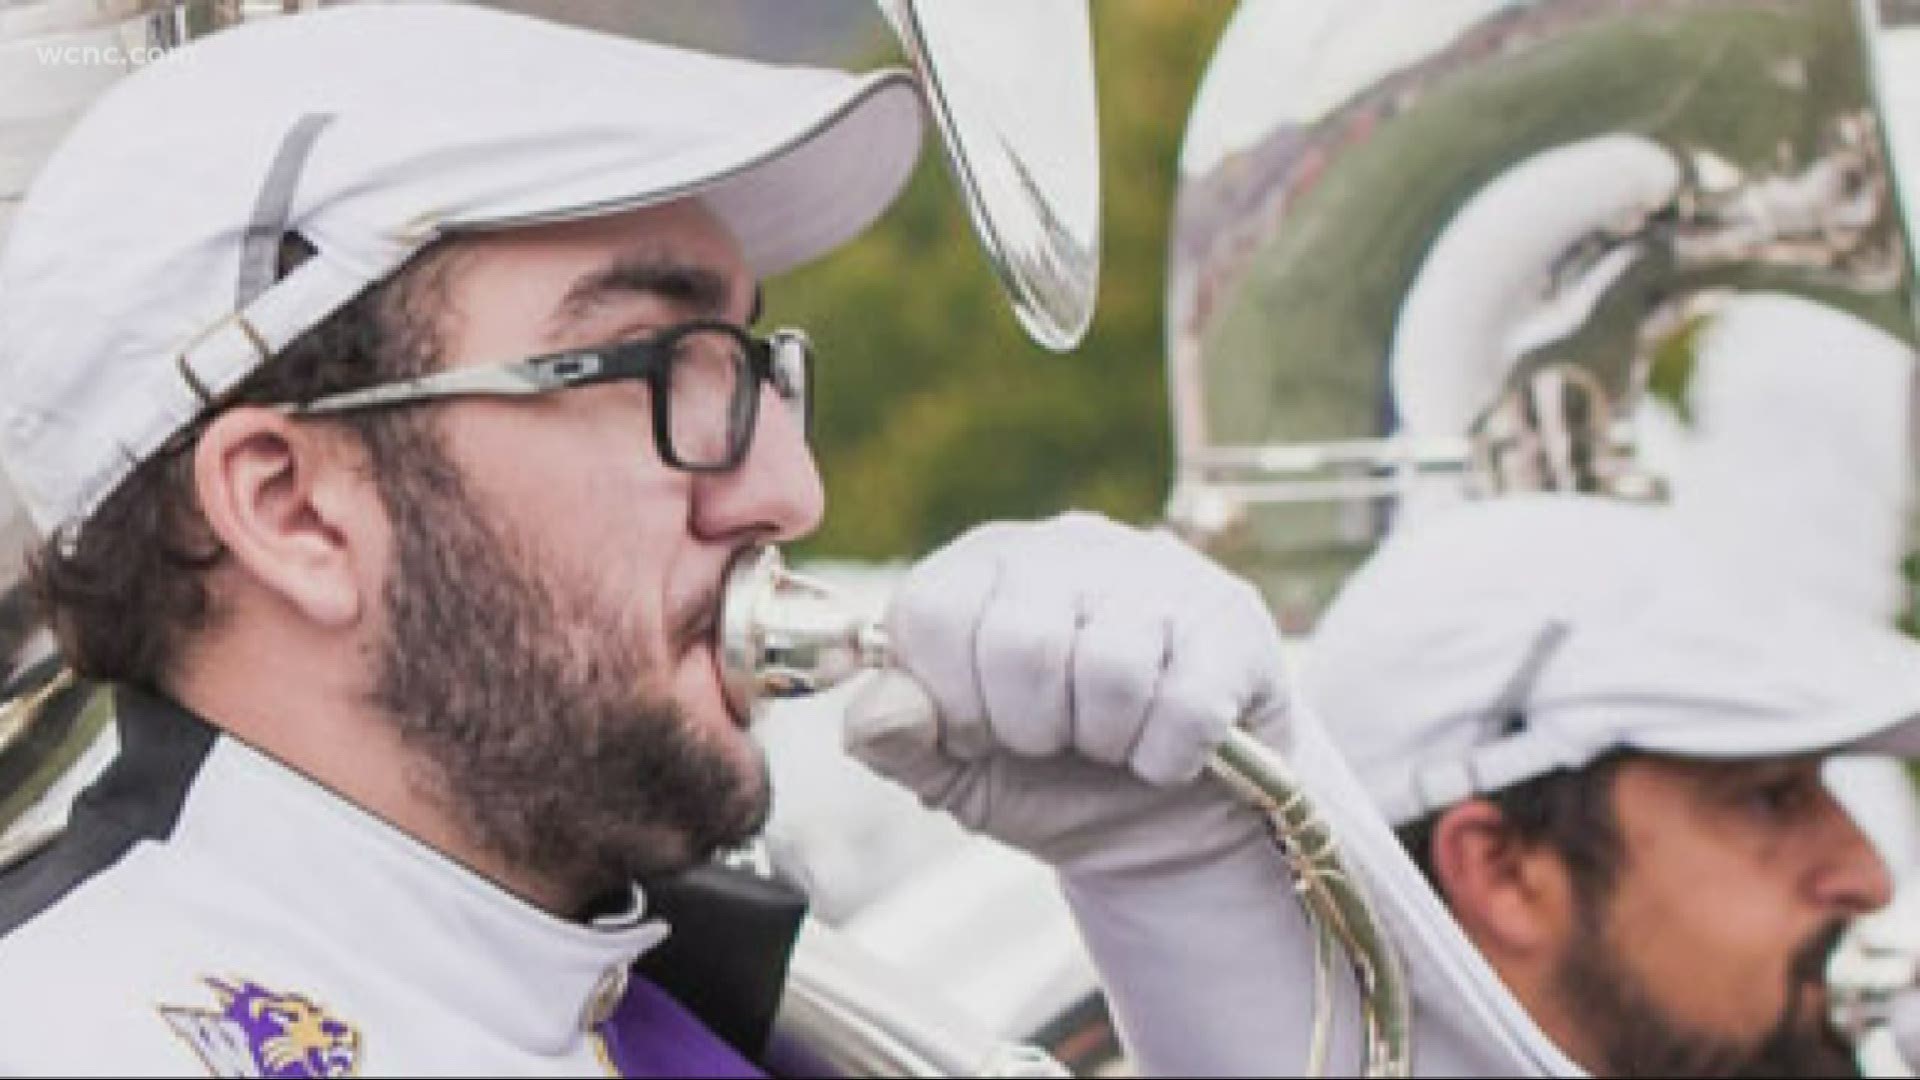 Western Carolina University’s “Pride of the Mountains” is one of the largest college marching bands in the country with more than 500 members.